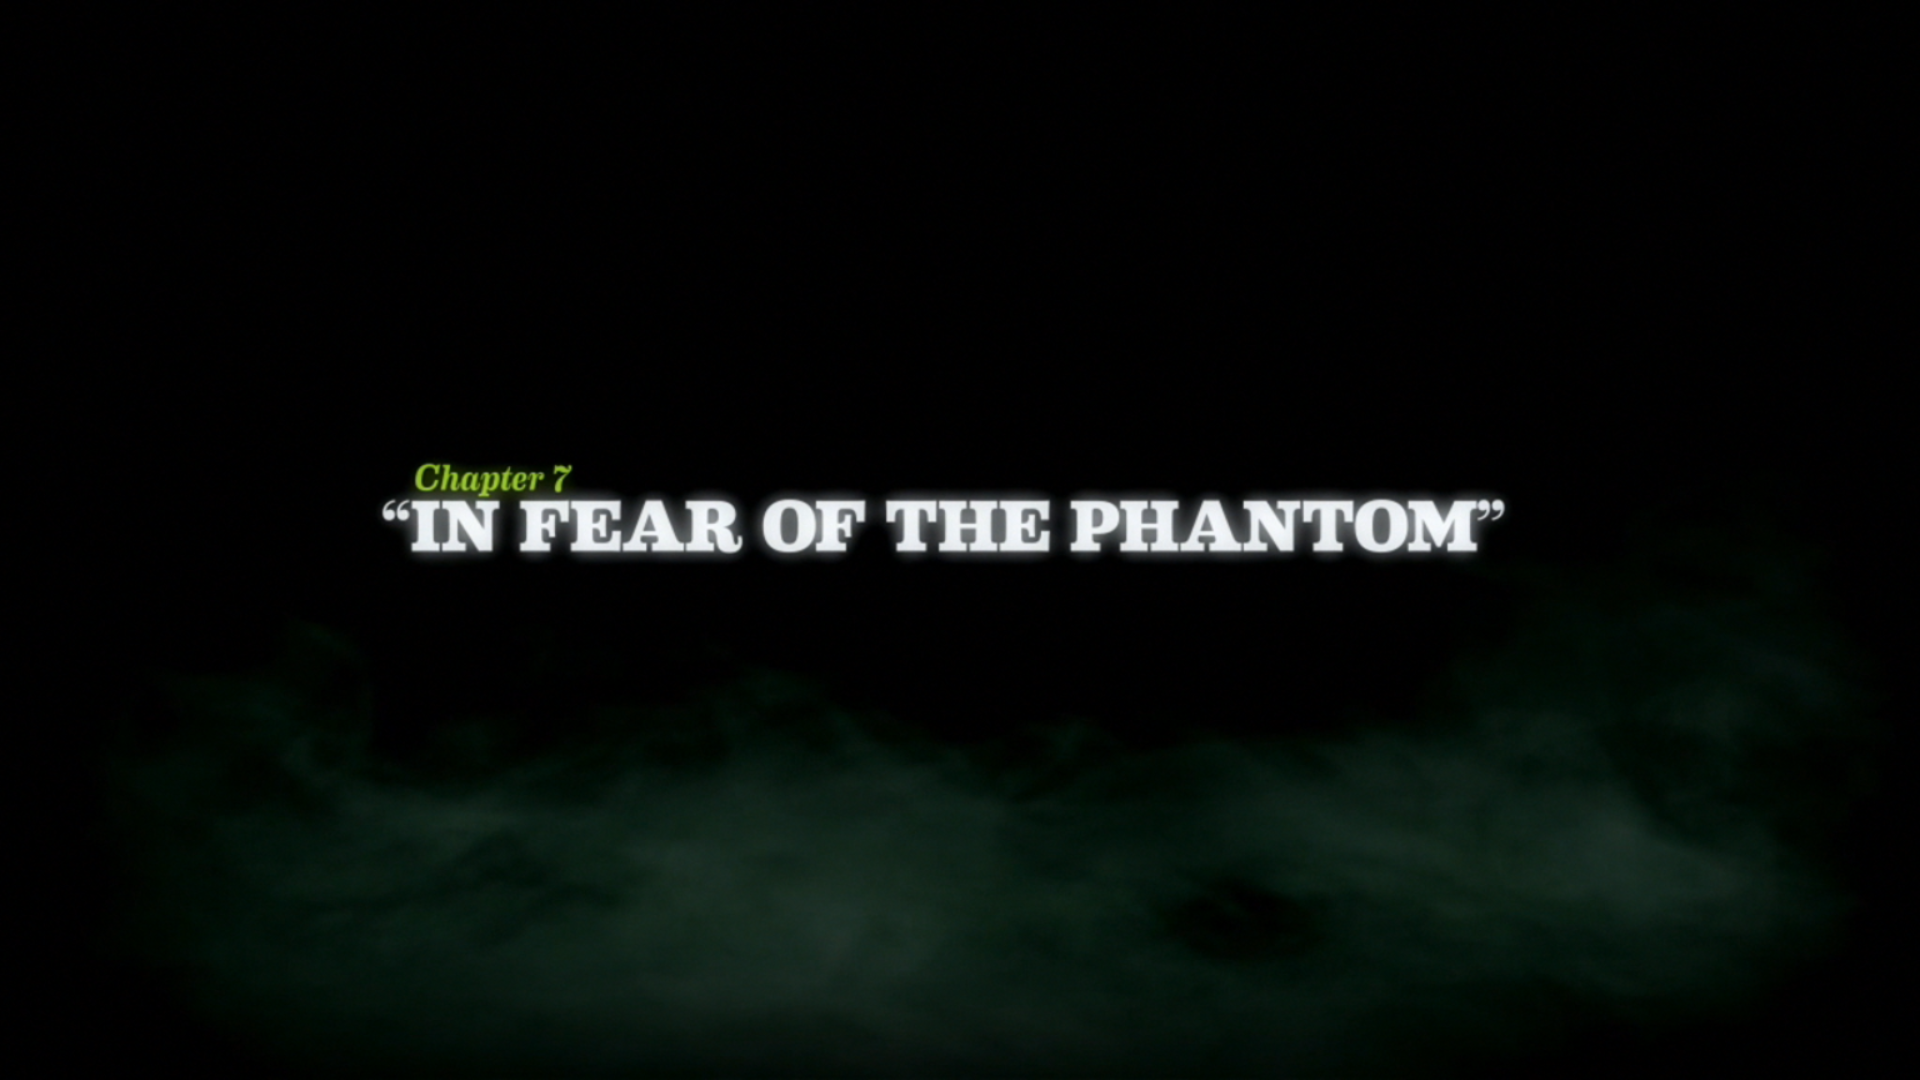 In_Fear_of_the_Phantom_title_card